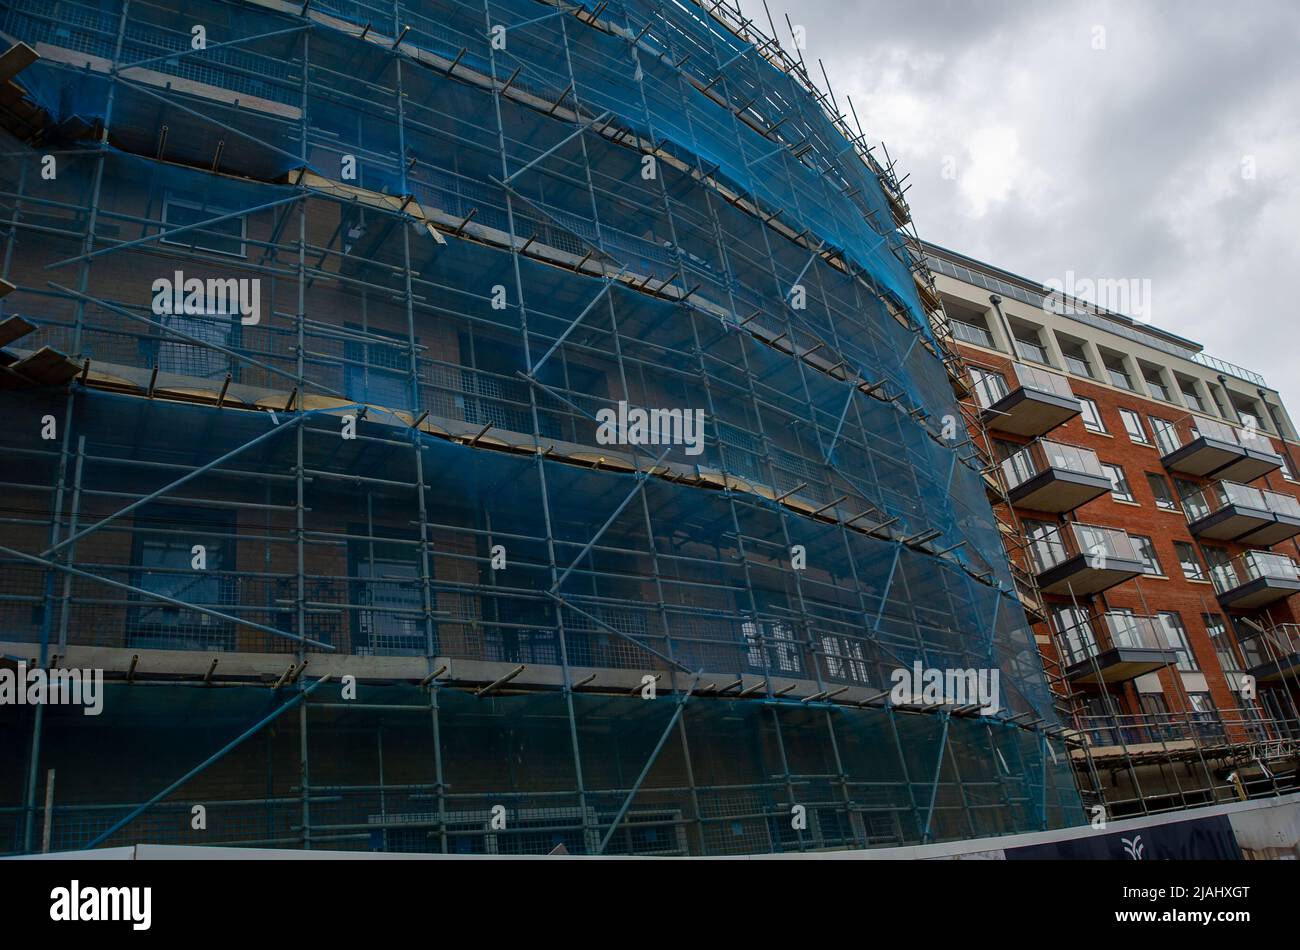 Maidenhead, Berkshire, UK. 30th May, 2022. Hundreds of new apartments are being built in Maidenhead Town Centre as part of a huge regeneration project. Maidenhead is now on the Elizabeth Line and property prices are increasing as a result. Credit: Maureen McLean/Alamy Stock Photo